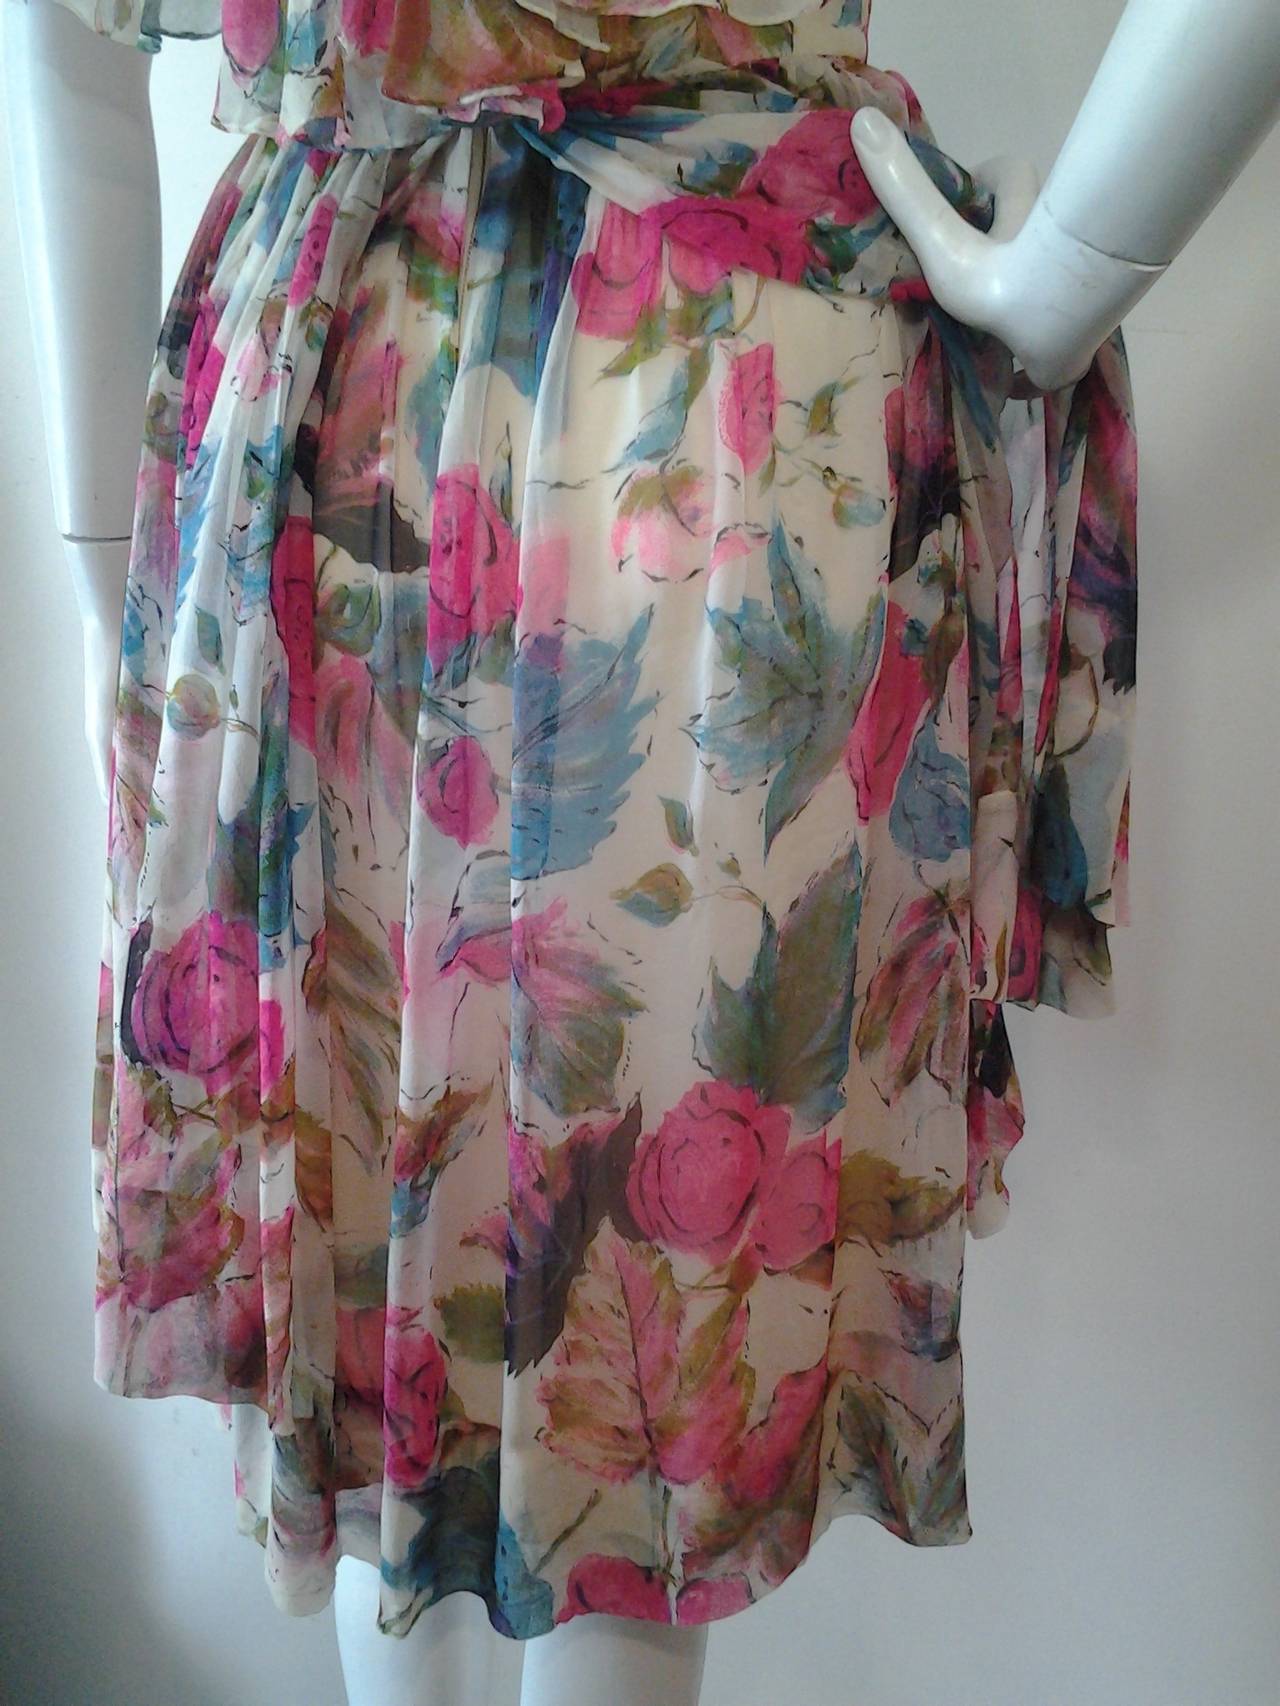 1950s unlabeled Suzy Perette style silk chiffon floral print cocktail dress with full skirt, ruched and draped bodice and flowing back caplet.  Skirt has two layers of print chiffon with lining.